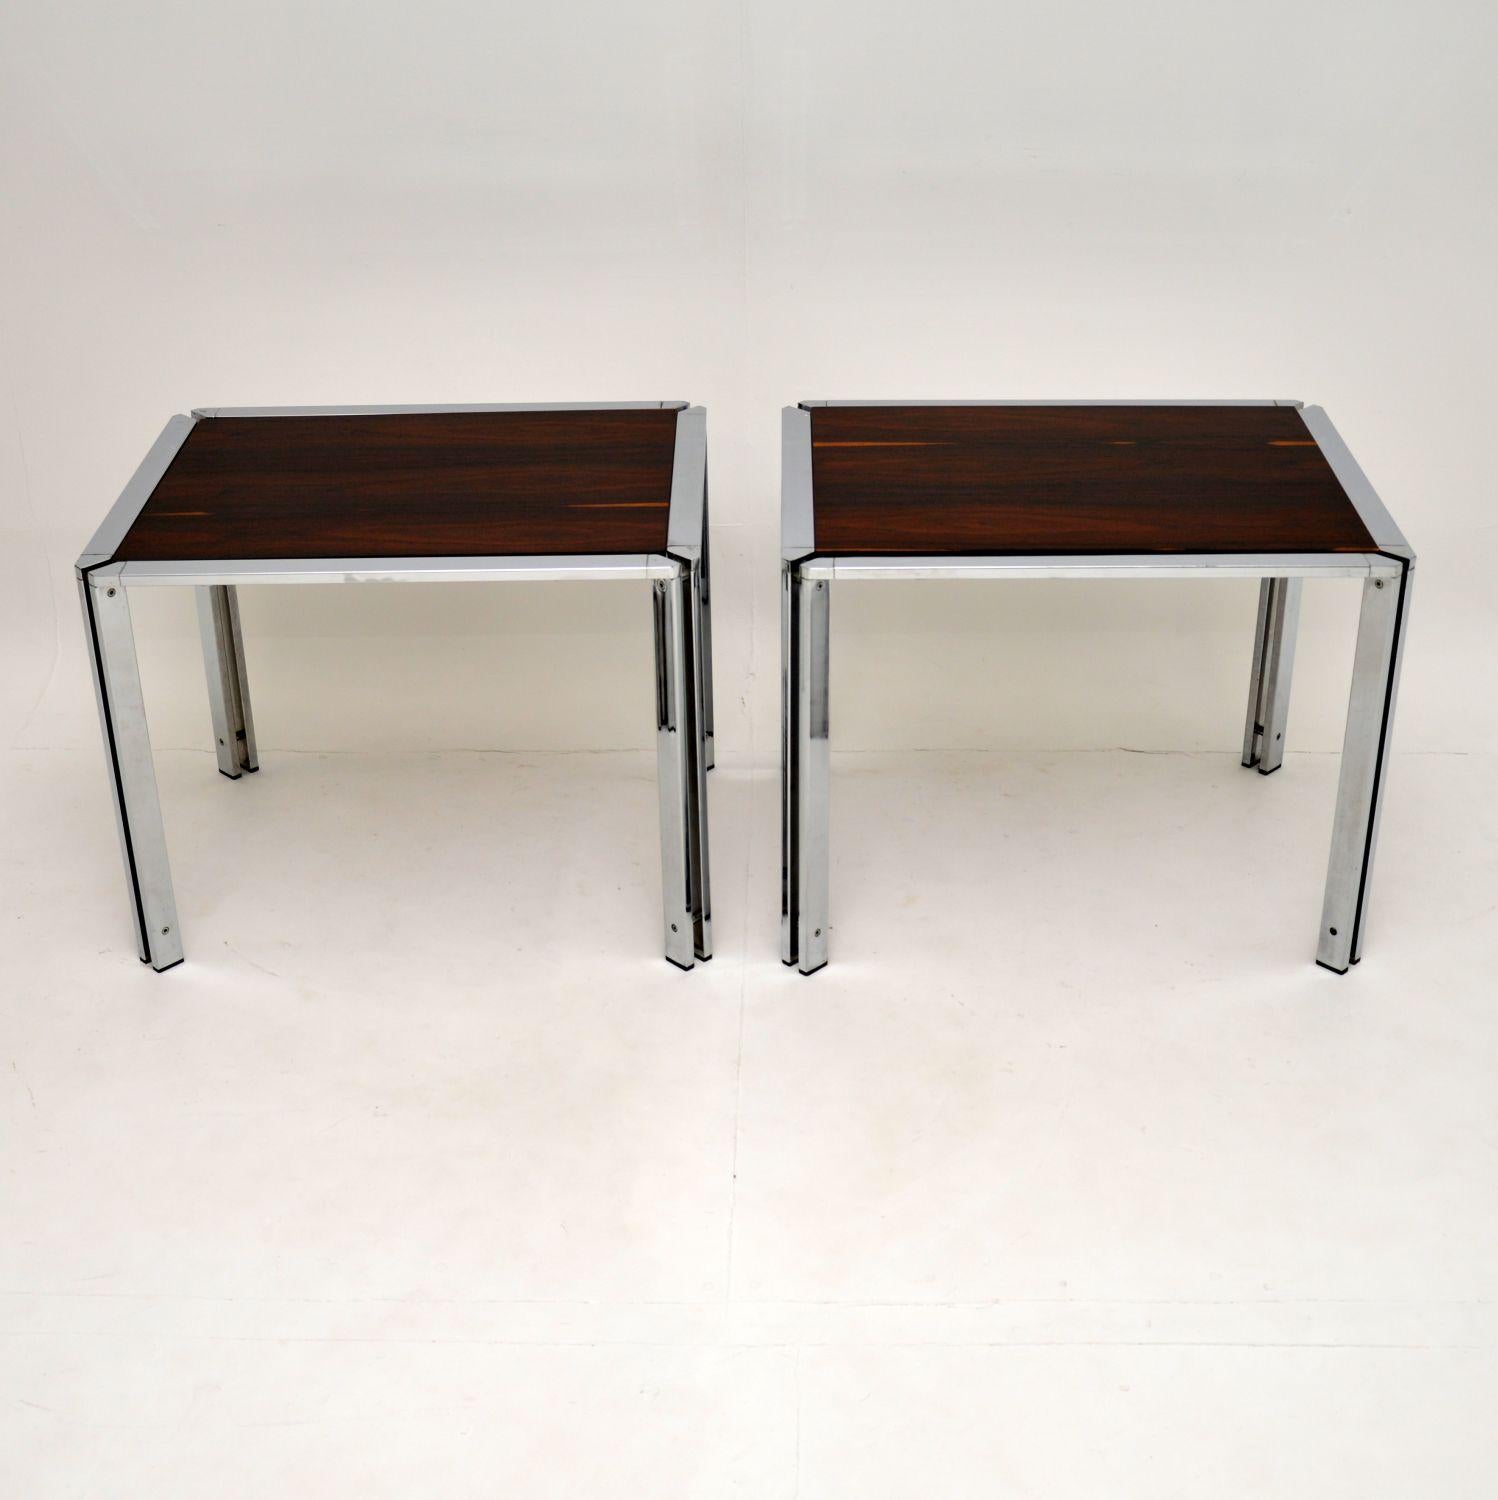 A stunning pair of vintage chrome side tables with inset wooden tops. These were made in Italy, they date from the 1960-1970’s.

They are beautifully made and are a very useful size. The polished chrome frames are in excellent condition with only